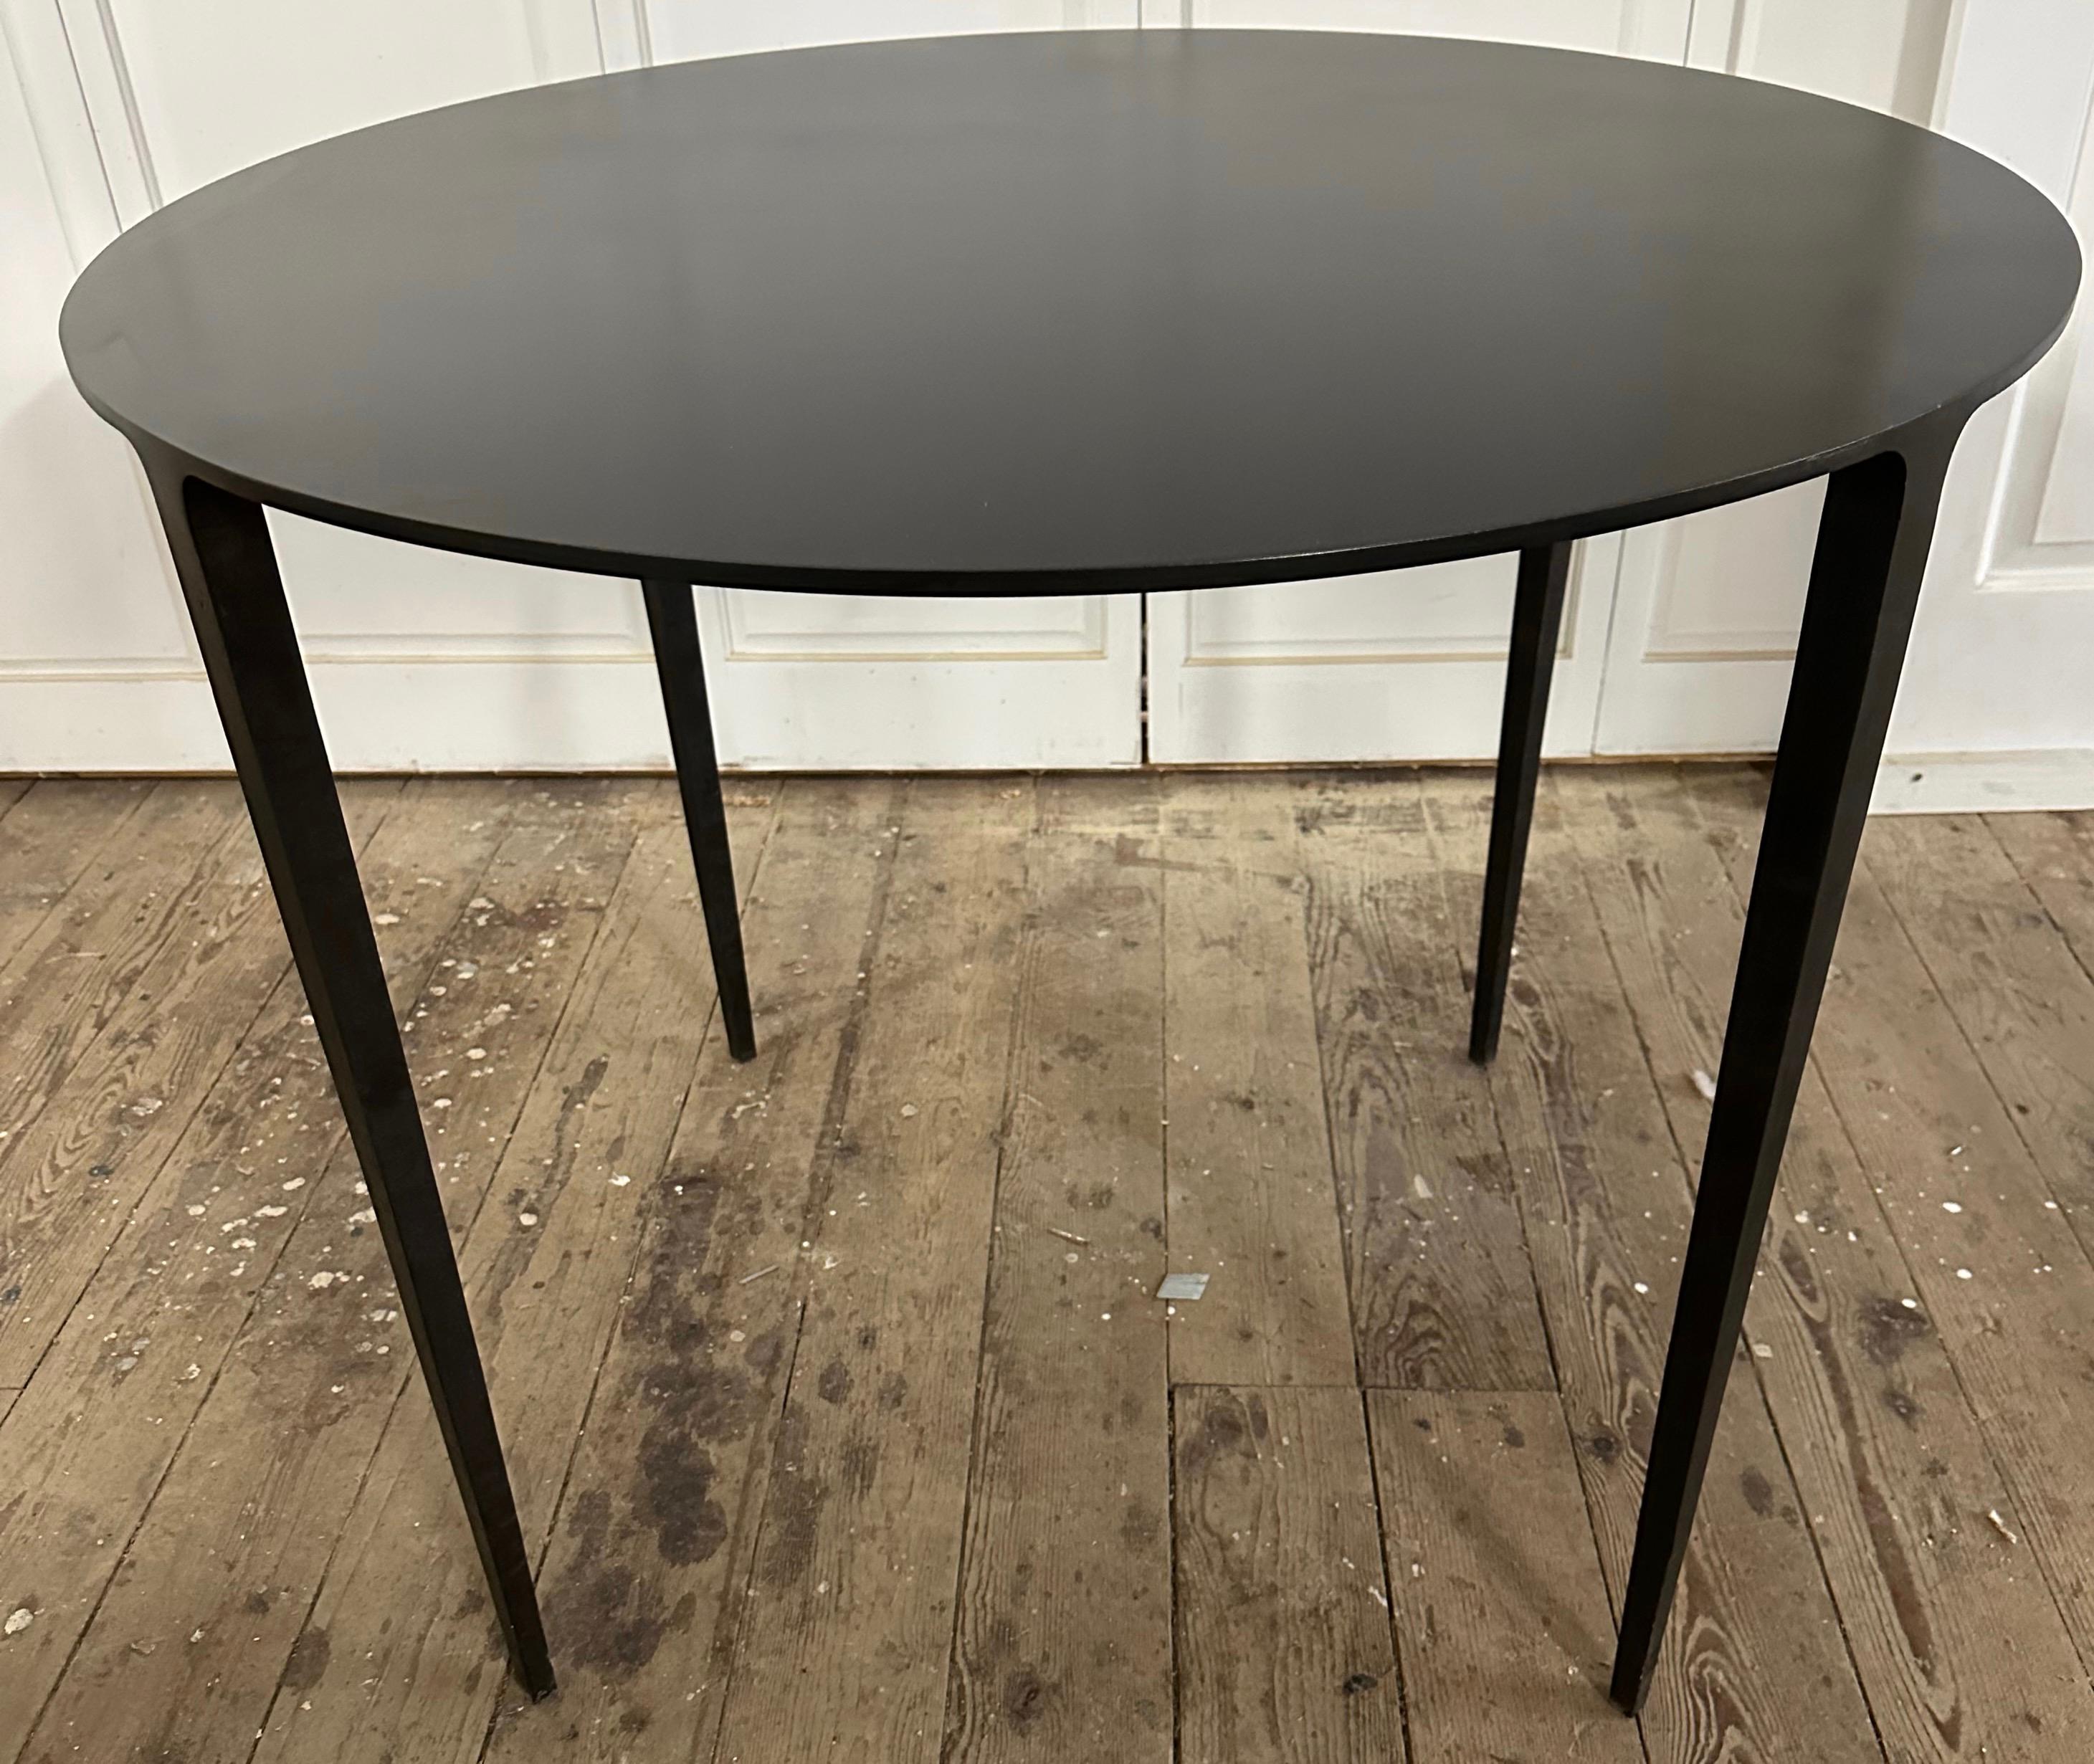 Contemporary minimalist Industrial round blackened steel table is custom hand forged iron.  Use this organic modern table for dining, office or a center table.  The sculpted bottom frame supports a smooth top-surface.
